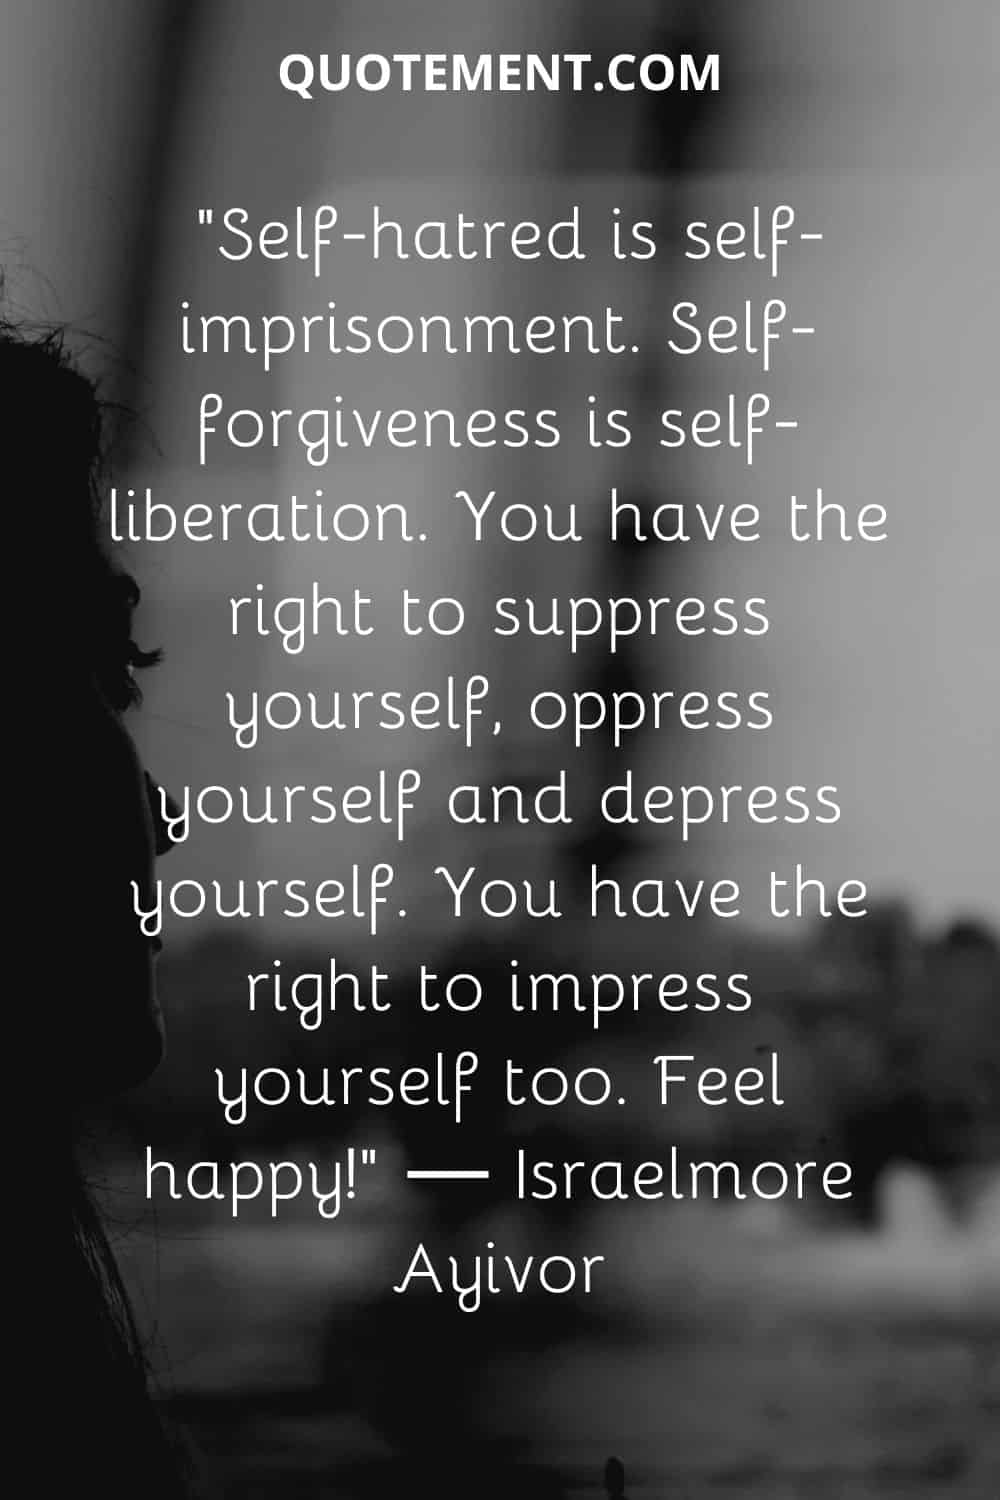 Self-hatred is self-imprisonment